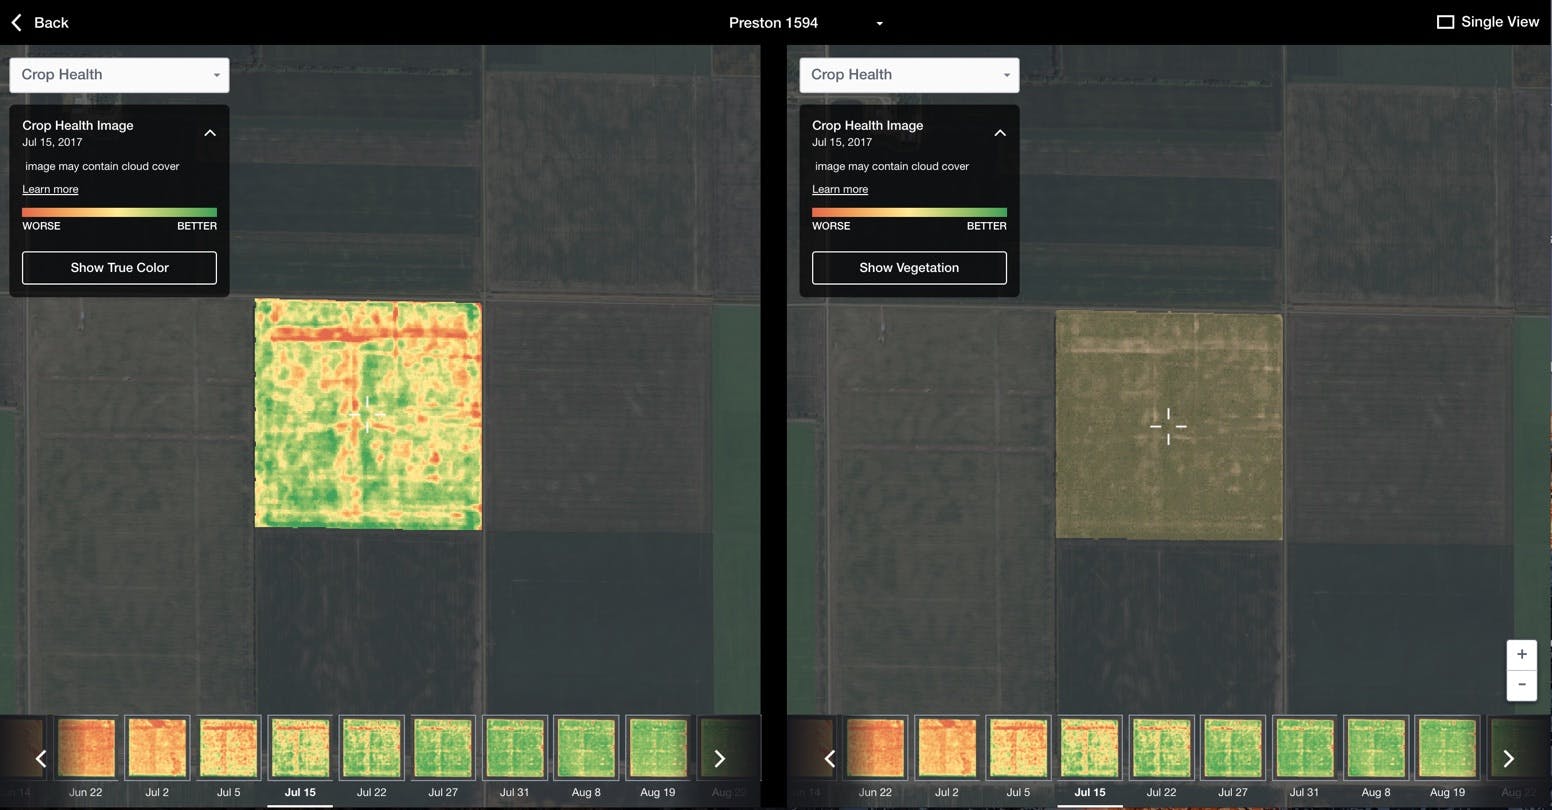 Compare Crop Health Imagery to true color satellite imagery with the Field Data Explorer from FarmLogs